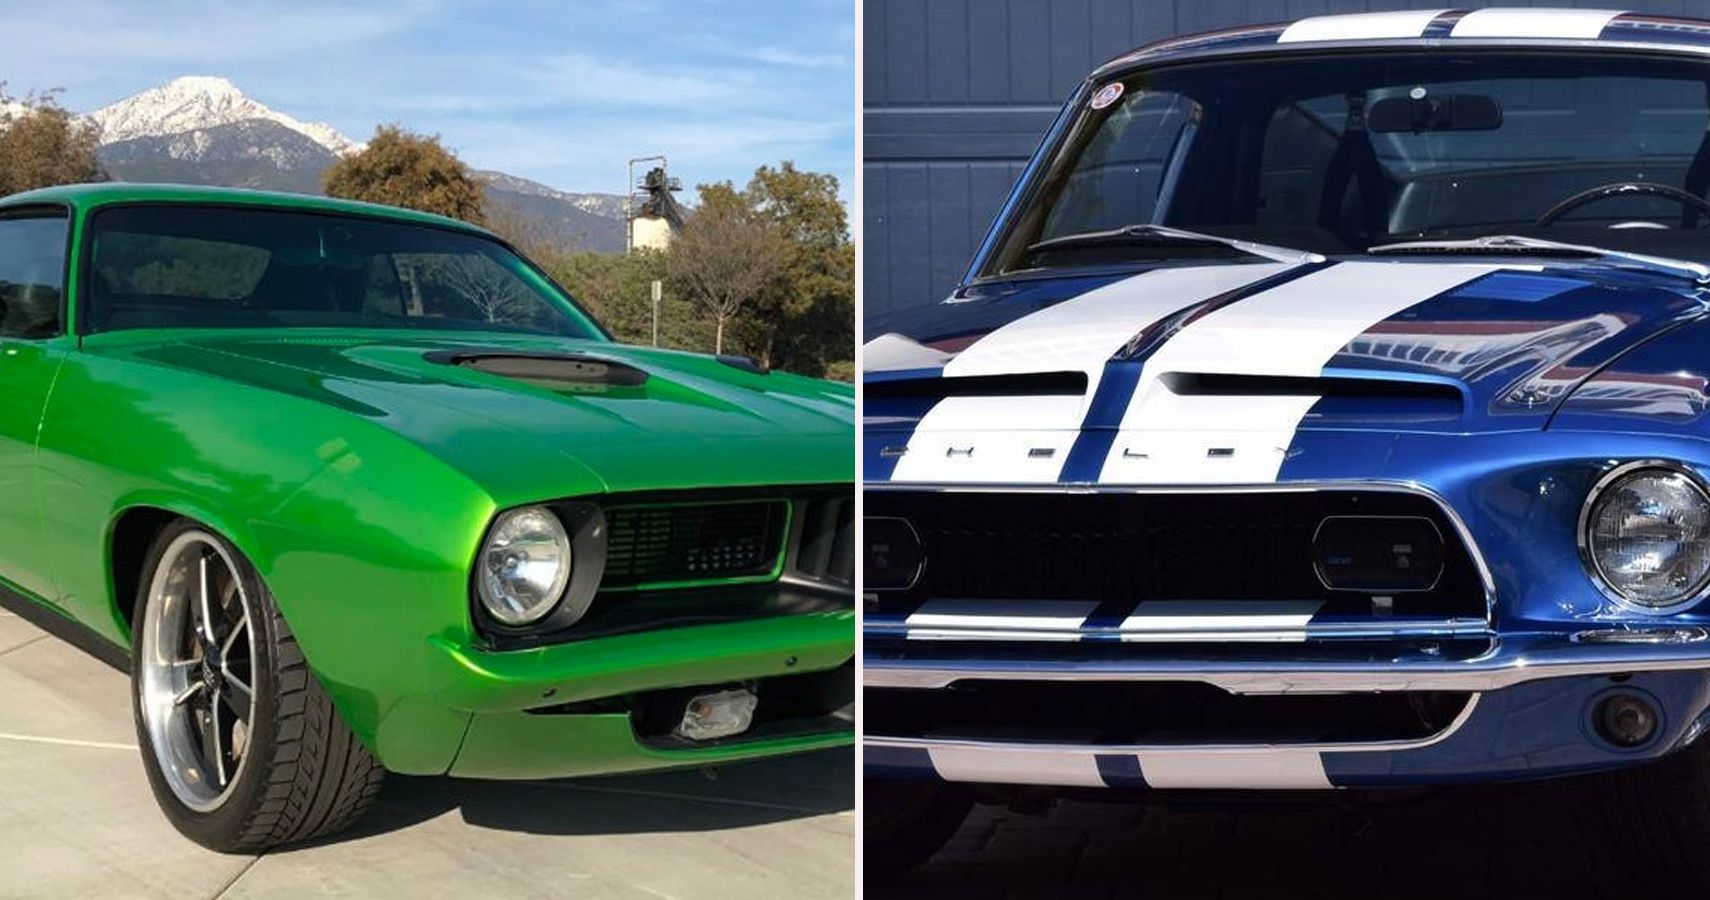 10 Most Badass Muscle Cars, Ranked